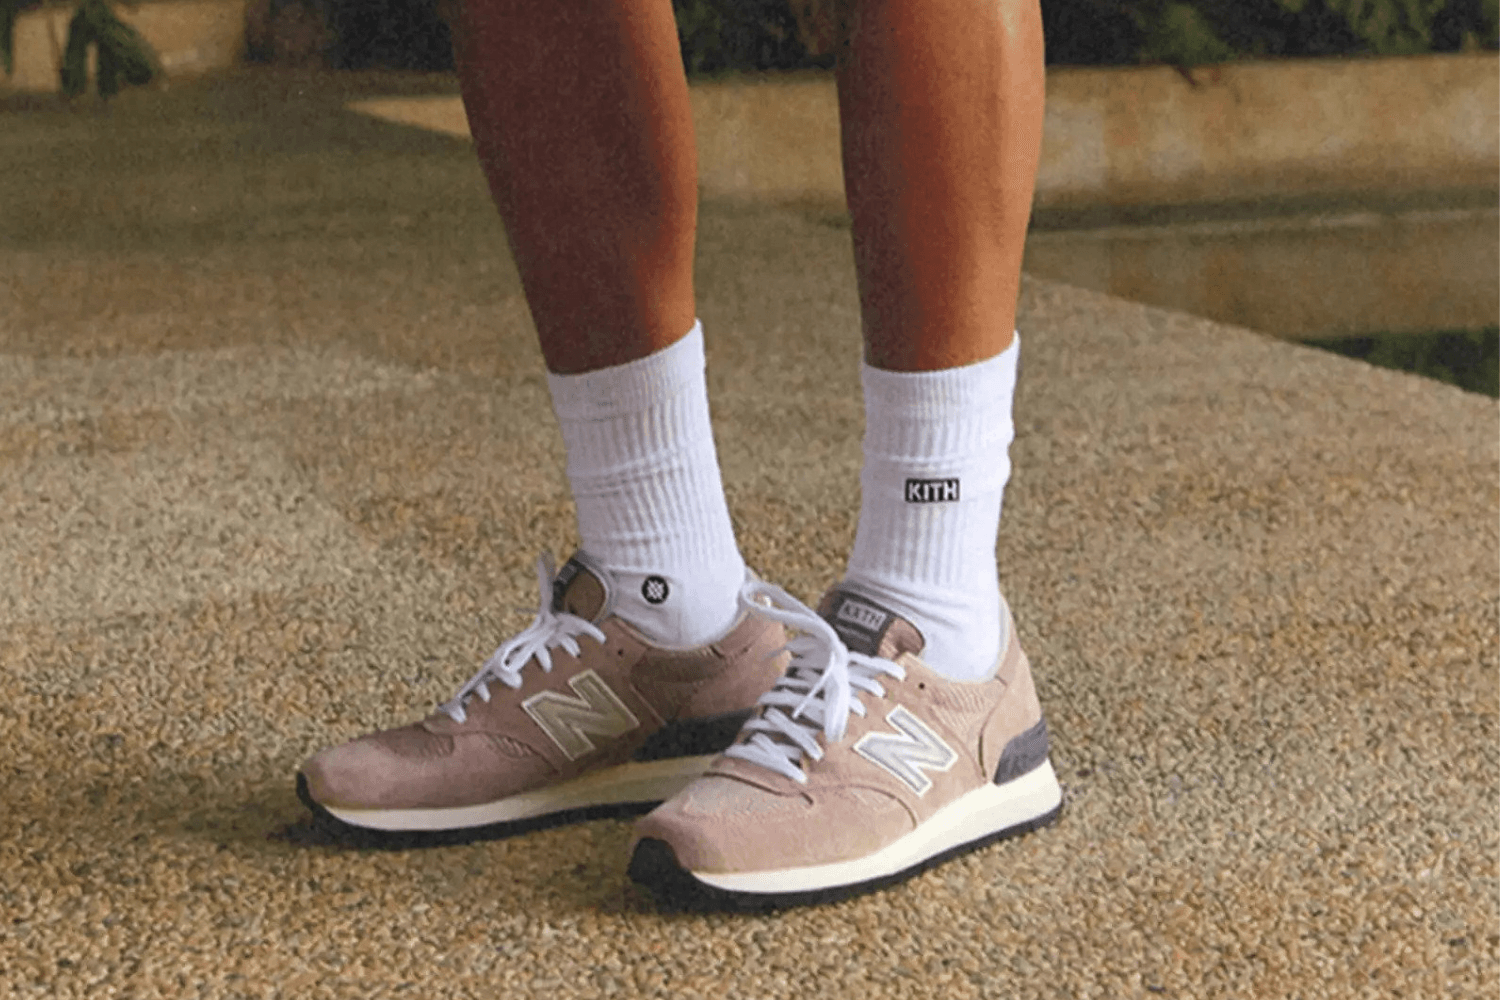 Kith x New Balance 990 pack will release soon